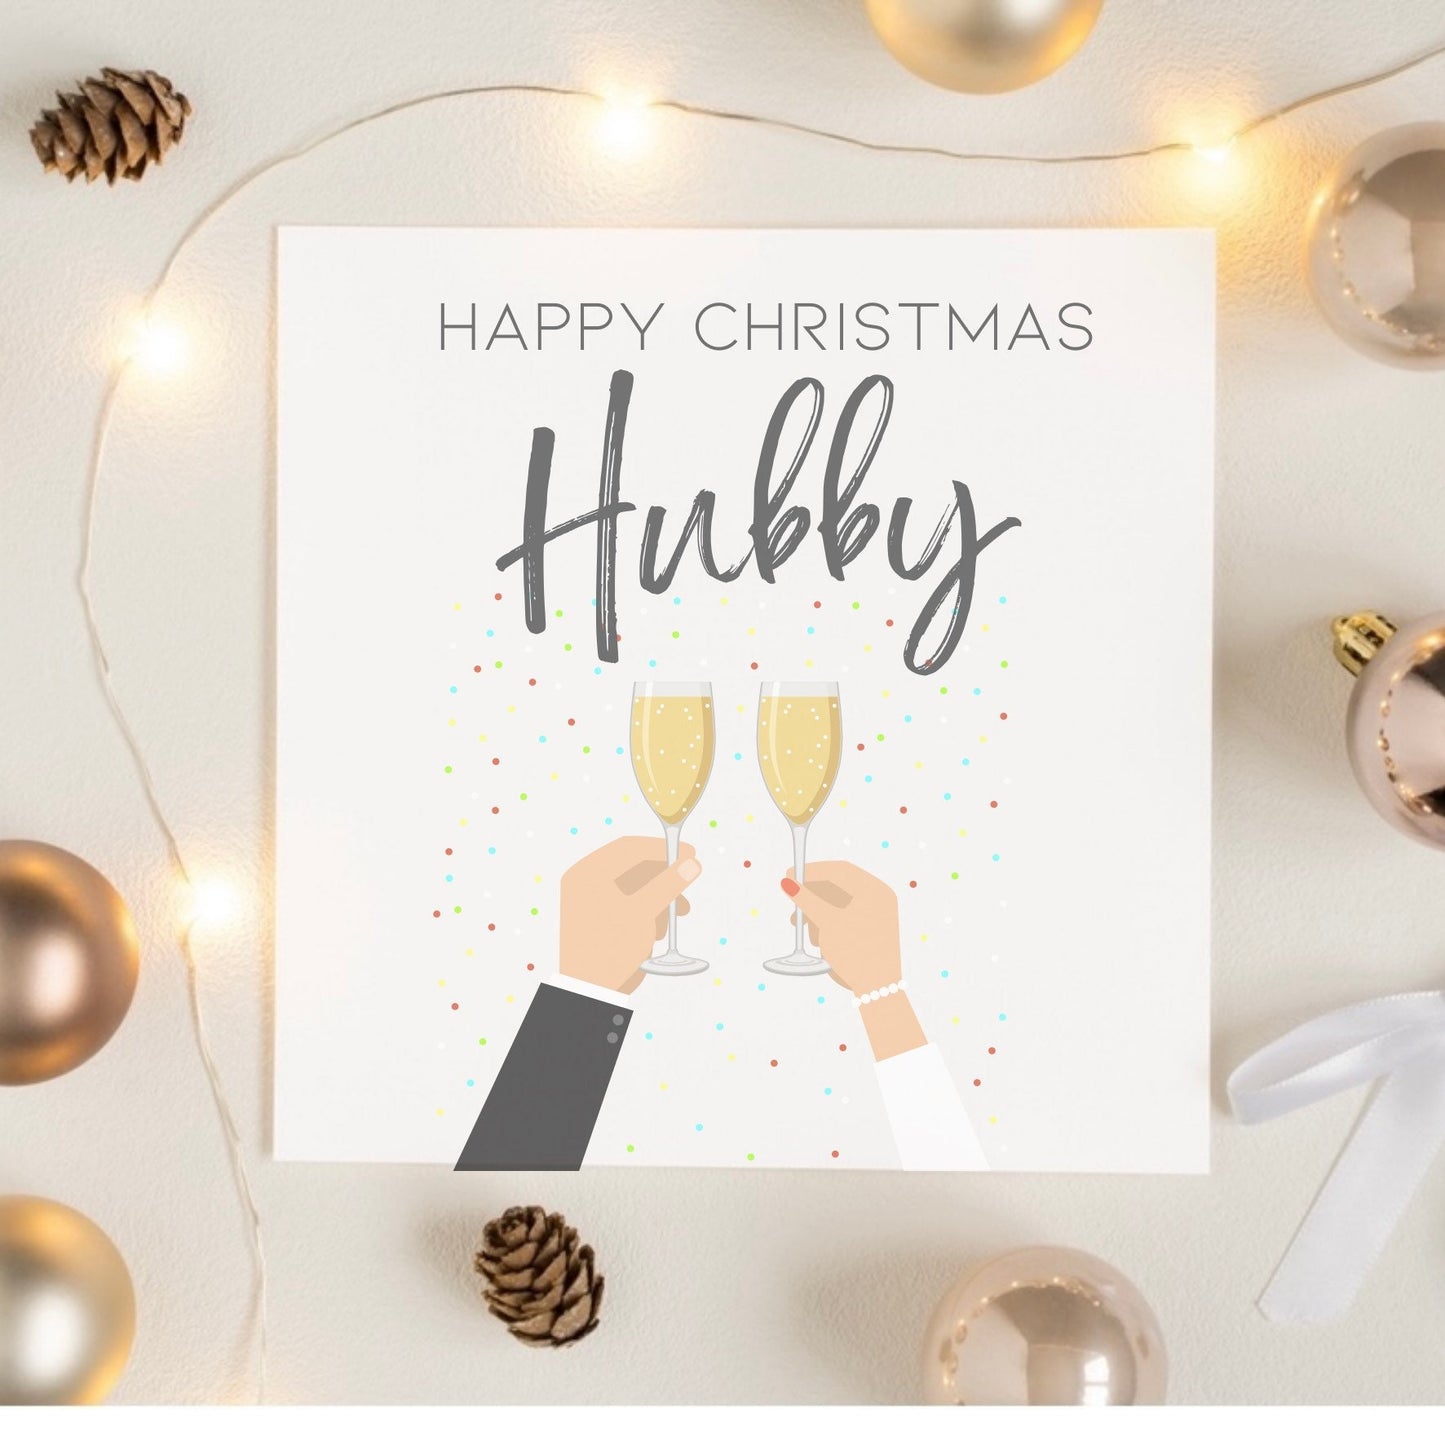 Happy Christmas Hubby Card, first Christmas married, new husband Xmas cards, newlyweds Xmas card, xmas champagne